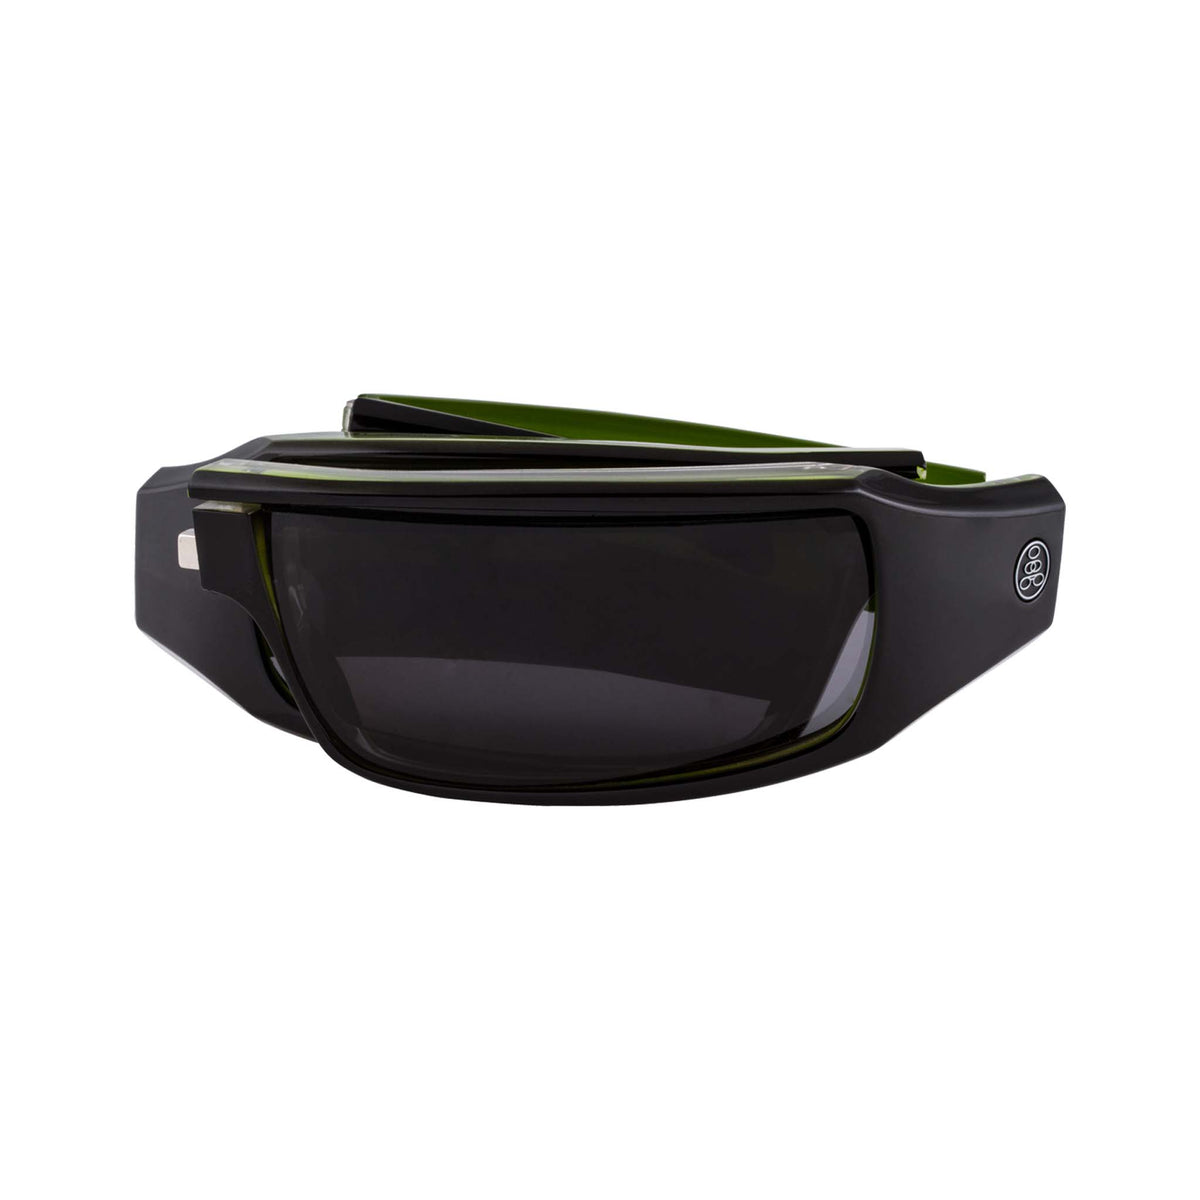 Popticals, Premium Compact Sunglasses, PopSign, 040020-GLGP, Polarized Sunglasses, Gloss Black over Green Crystal Frame, Gray Lenses, Compact View